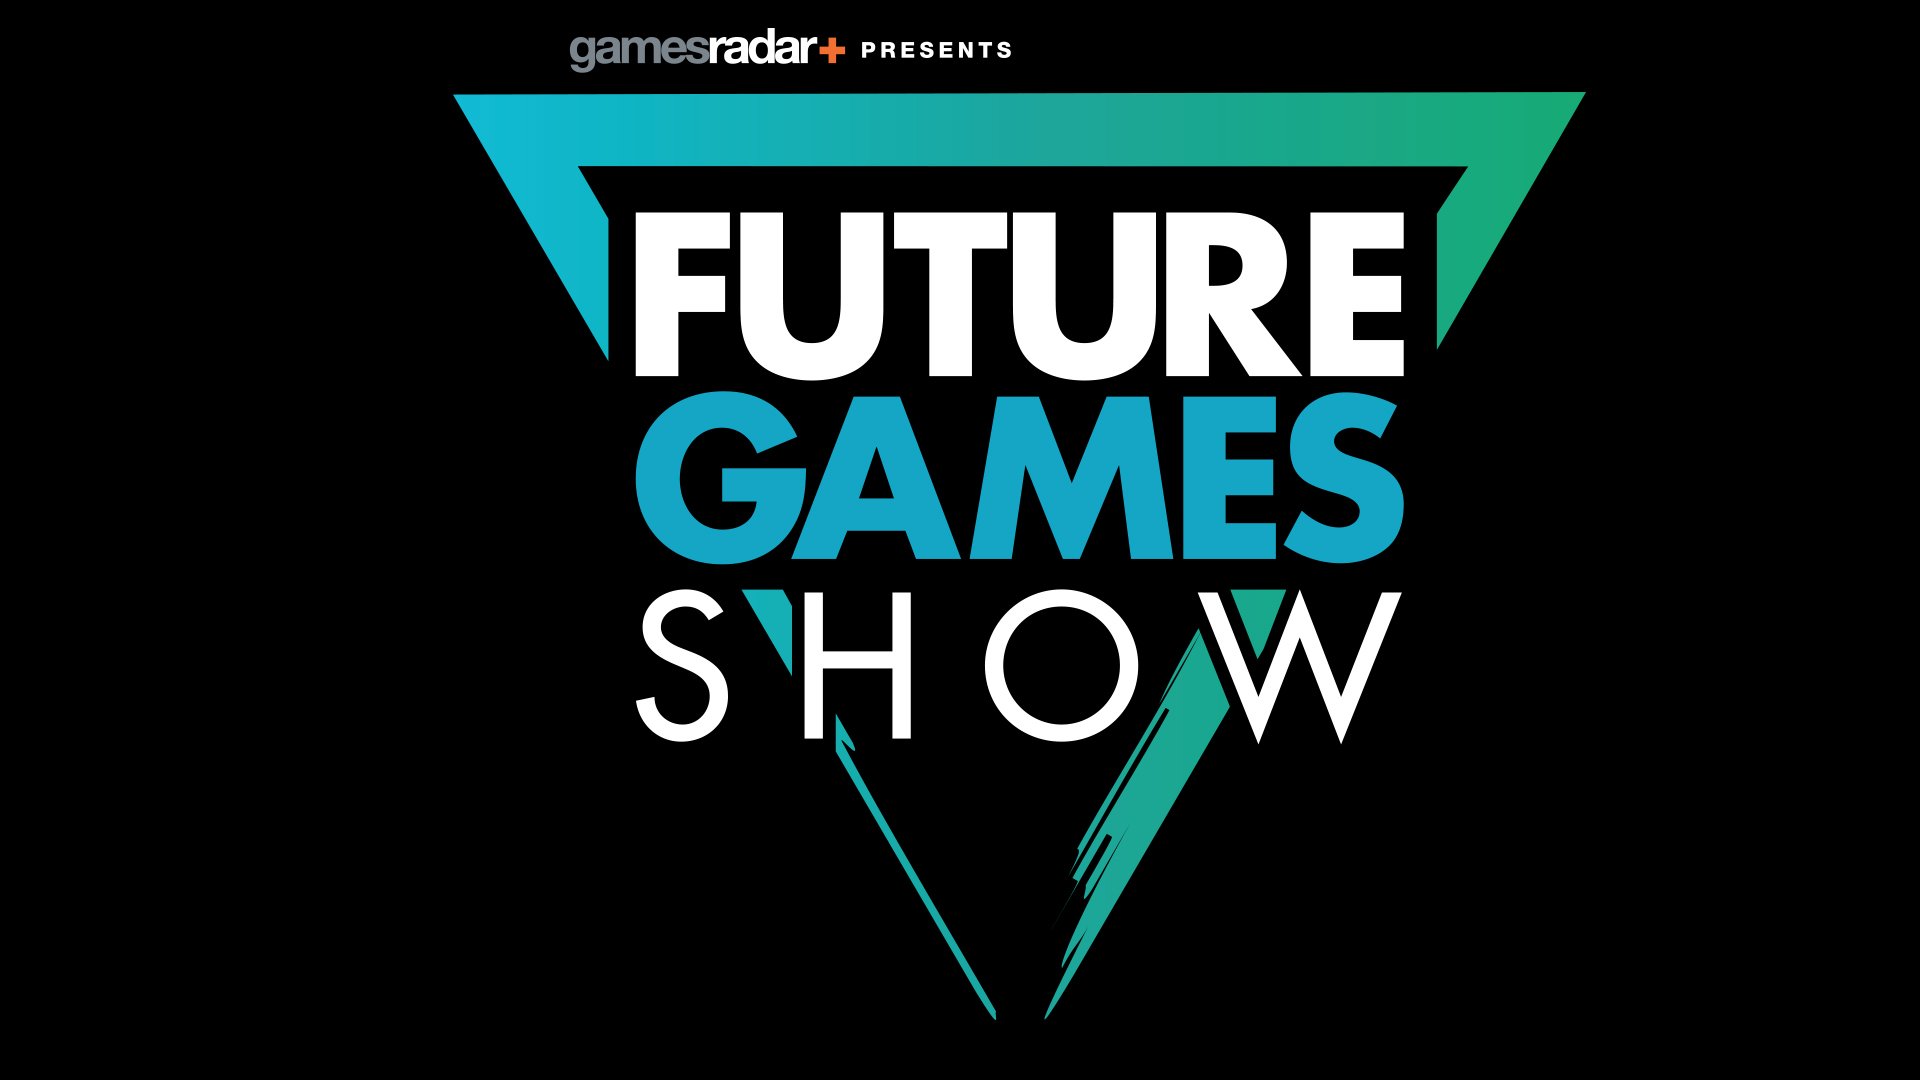 Hero image for Future Games Show by GamesRadar.